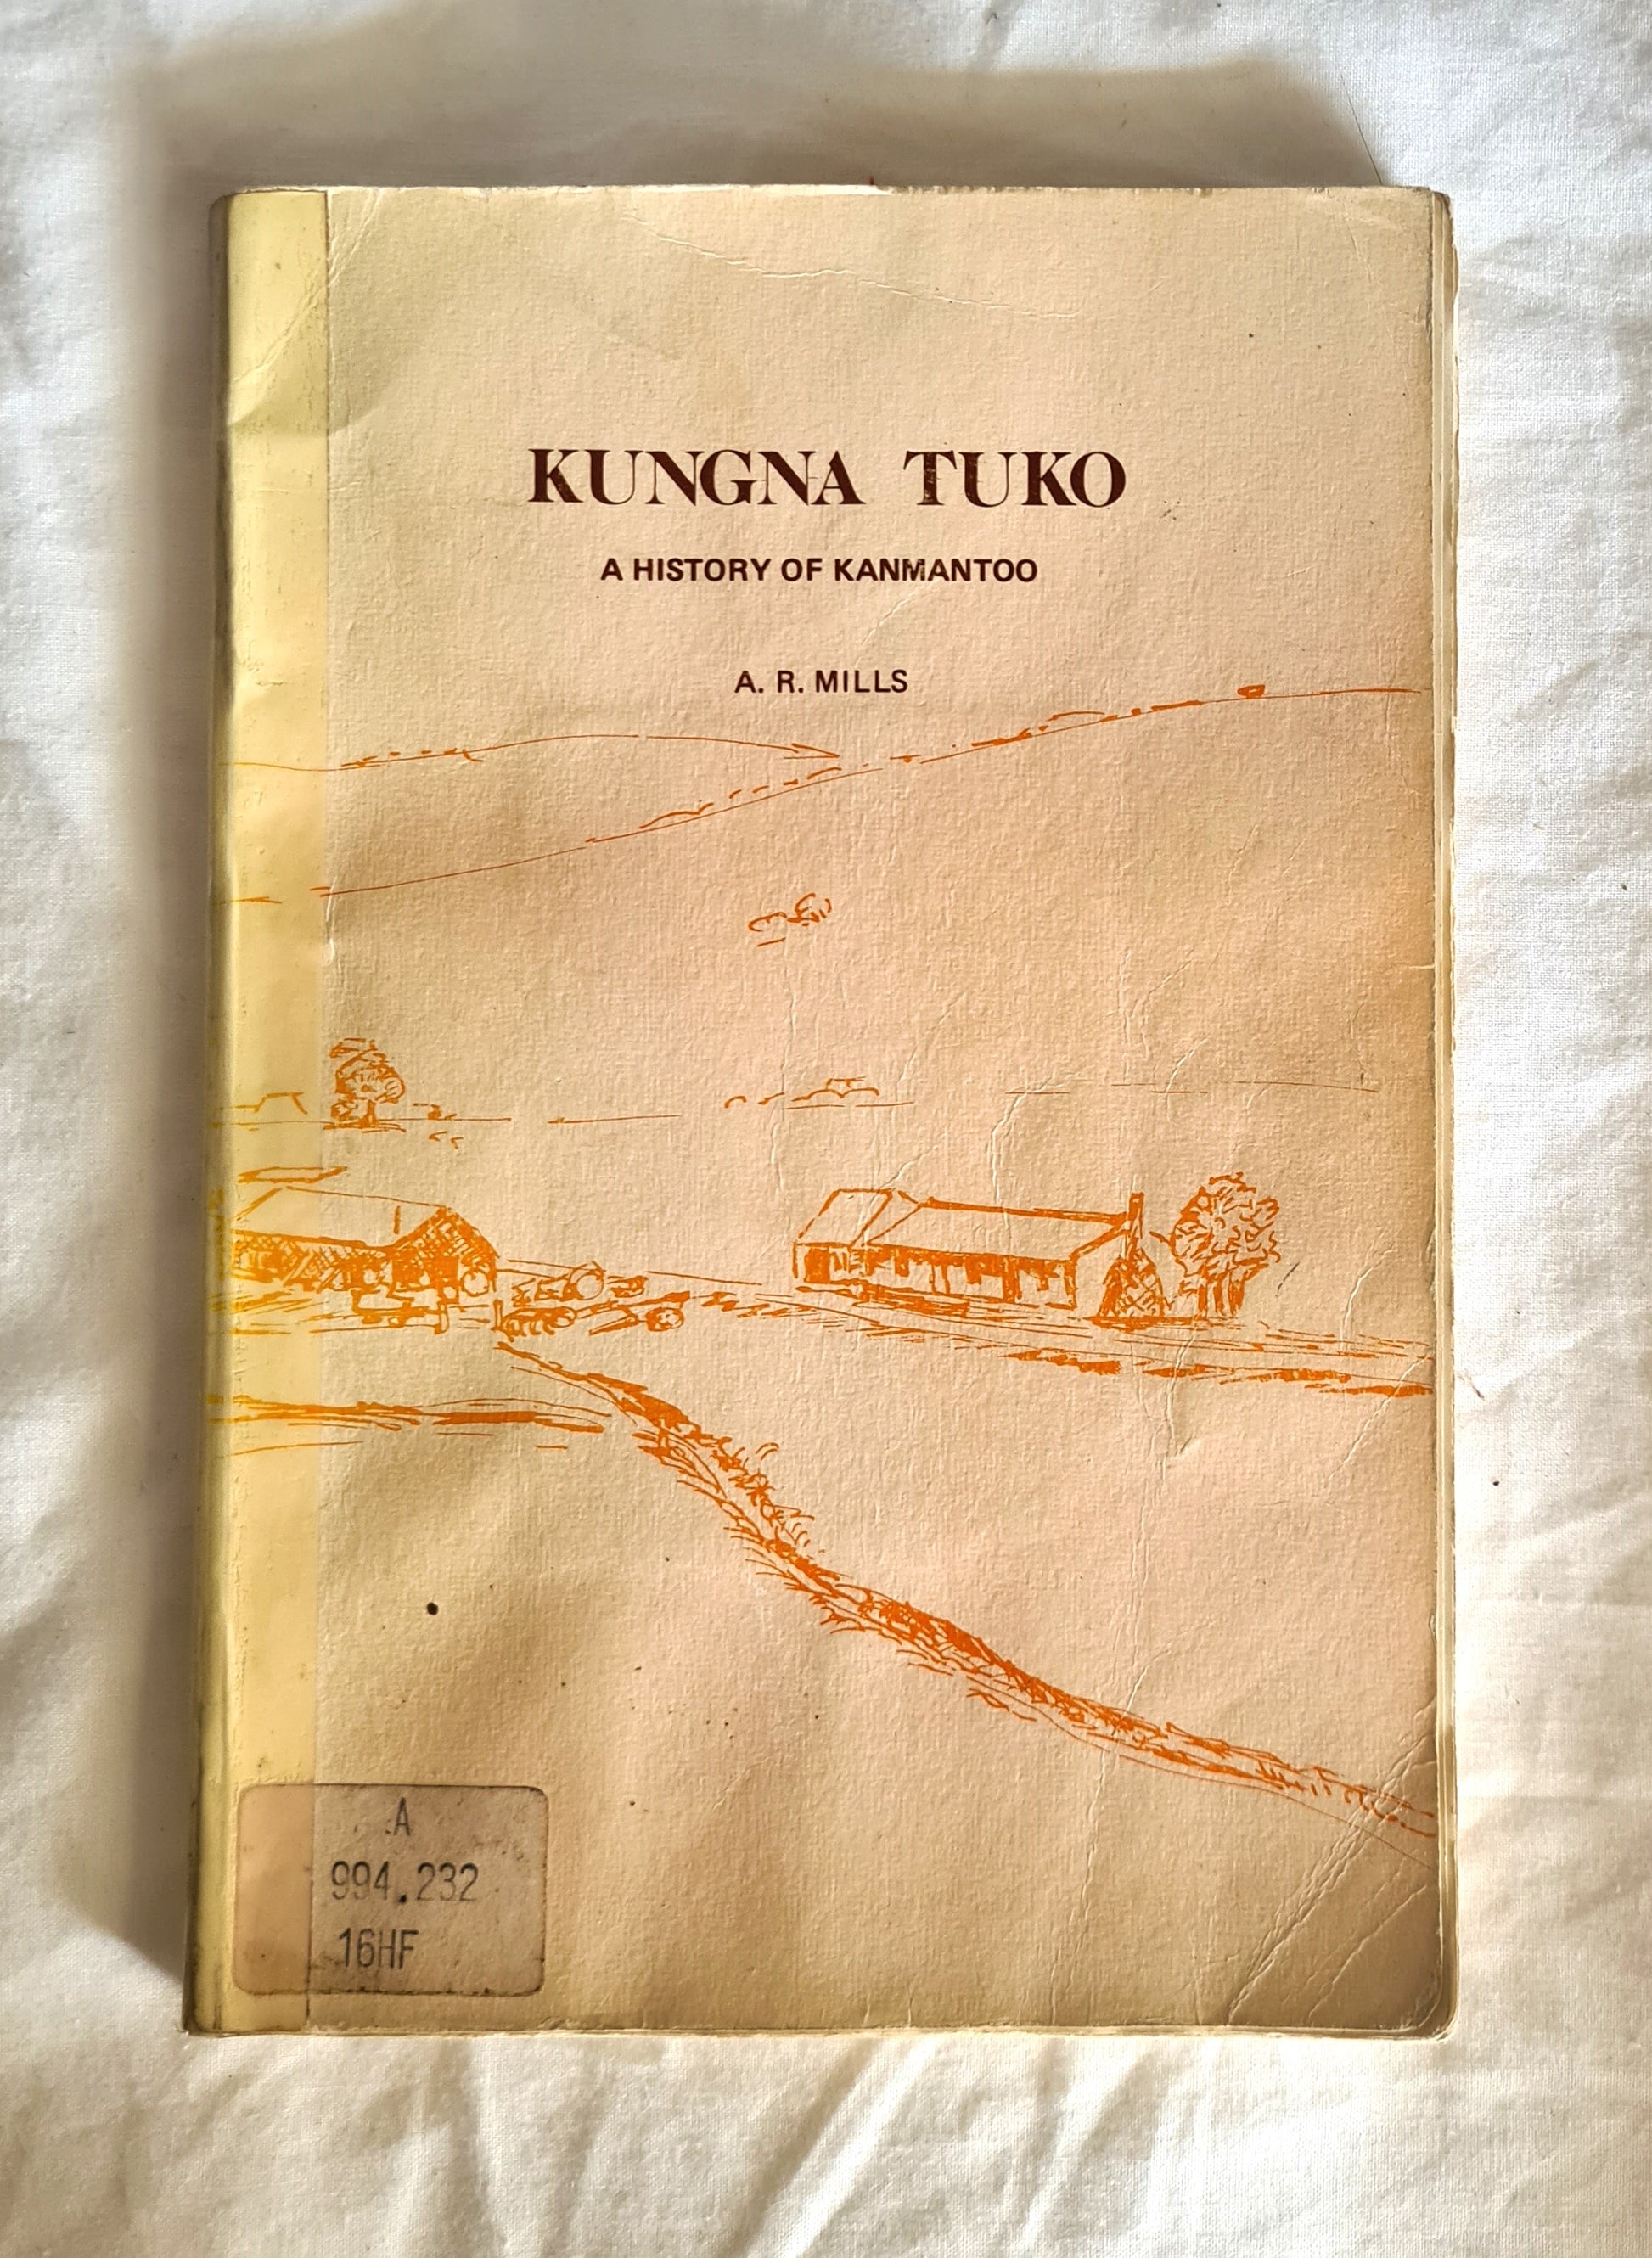 Kungna Tuko  A History of Kanmantoo  by A. R. Mills